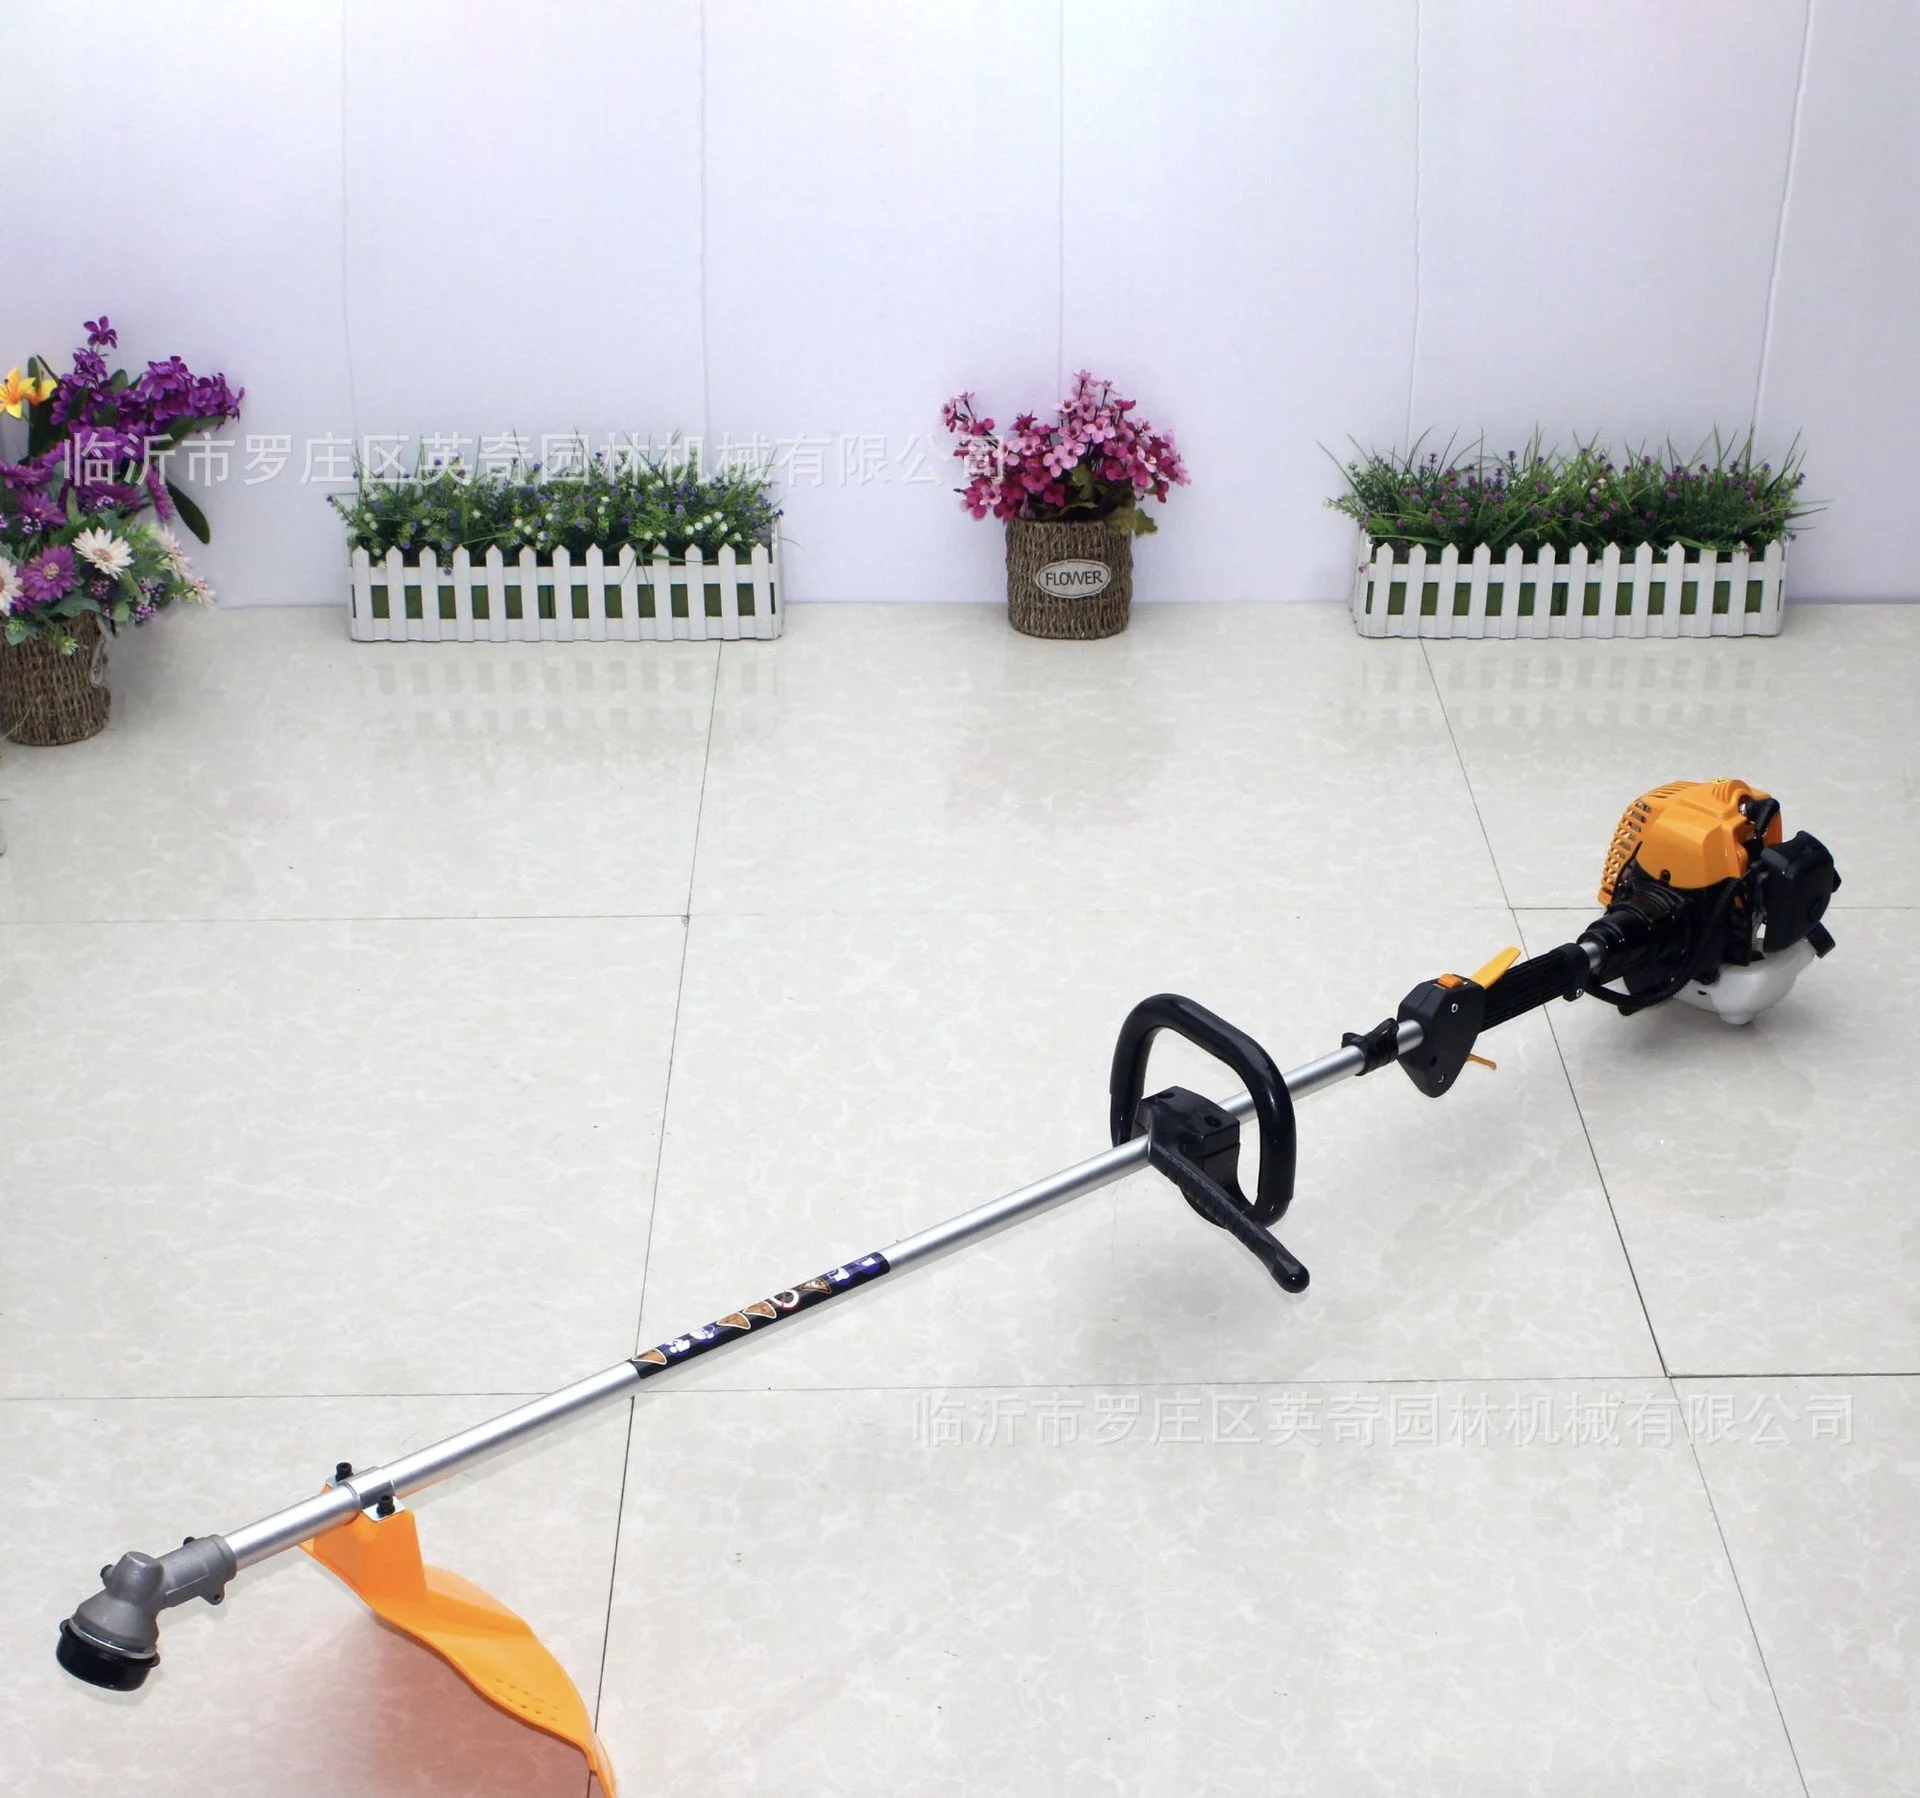 

CG260 Brush Cutter 34FB Engine Lawn Mower / Two Stroke 26cc Backpack Gasoline Weeder Grass Trimmer Gardening Tools